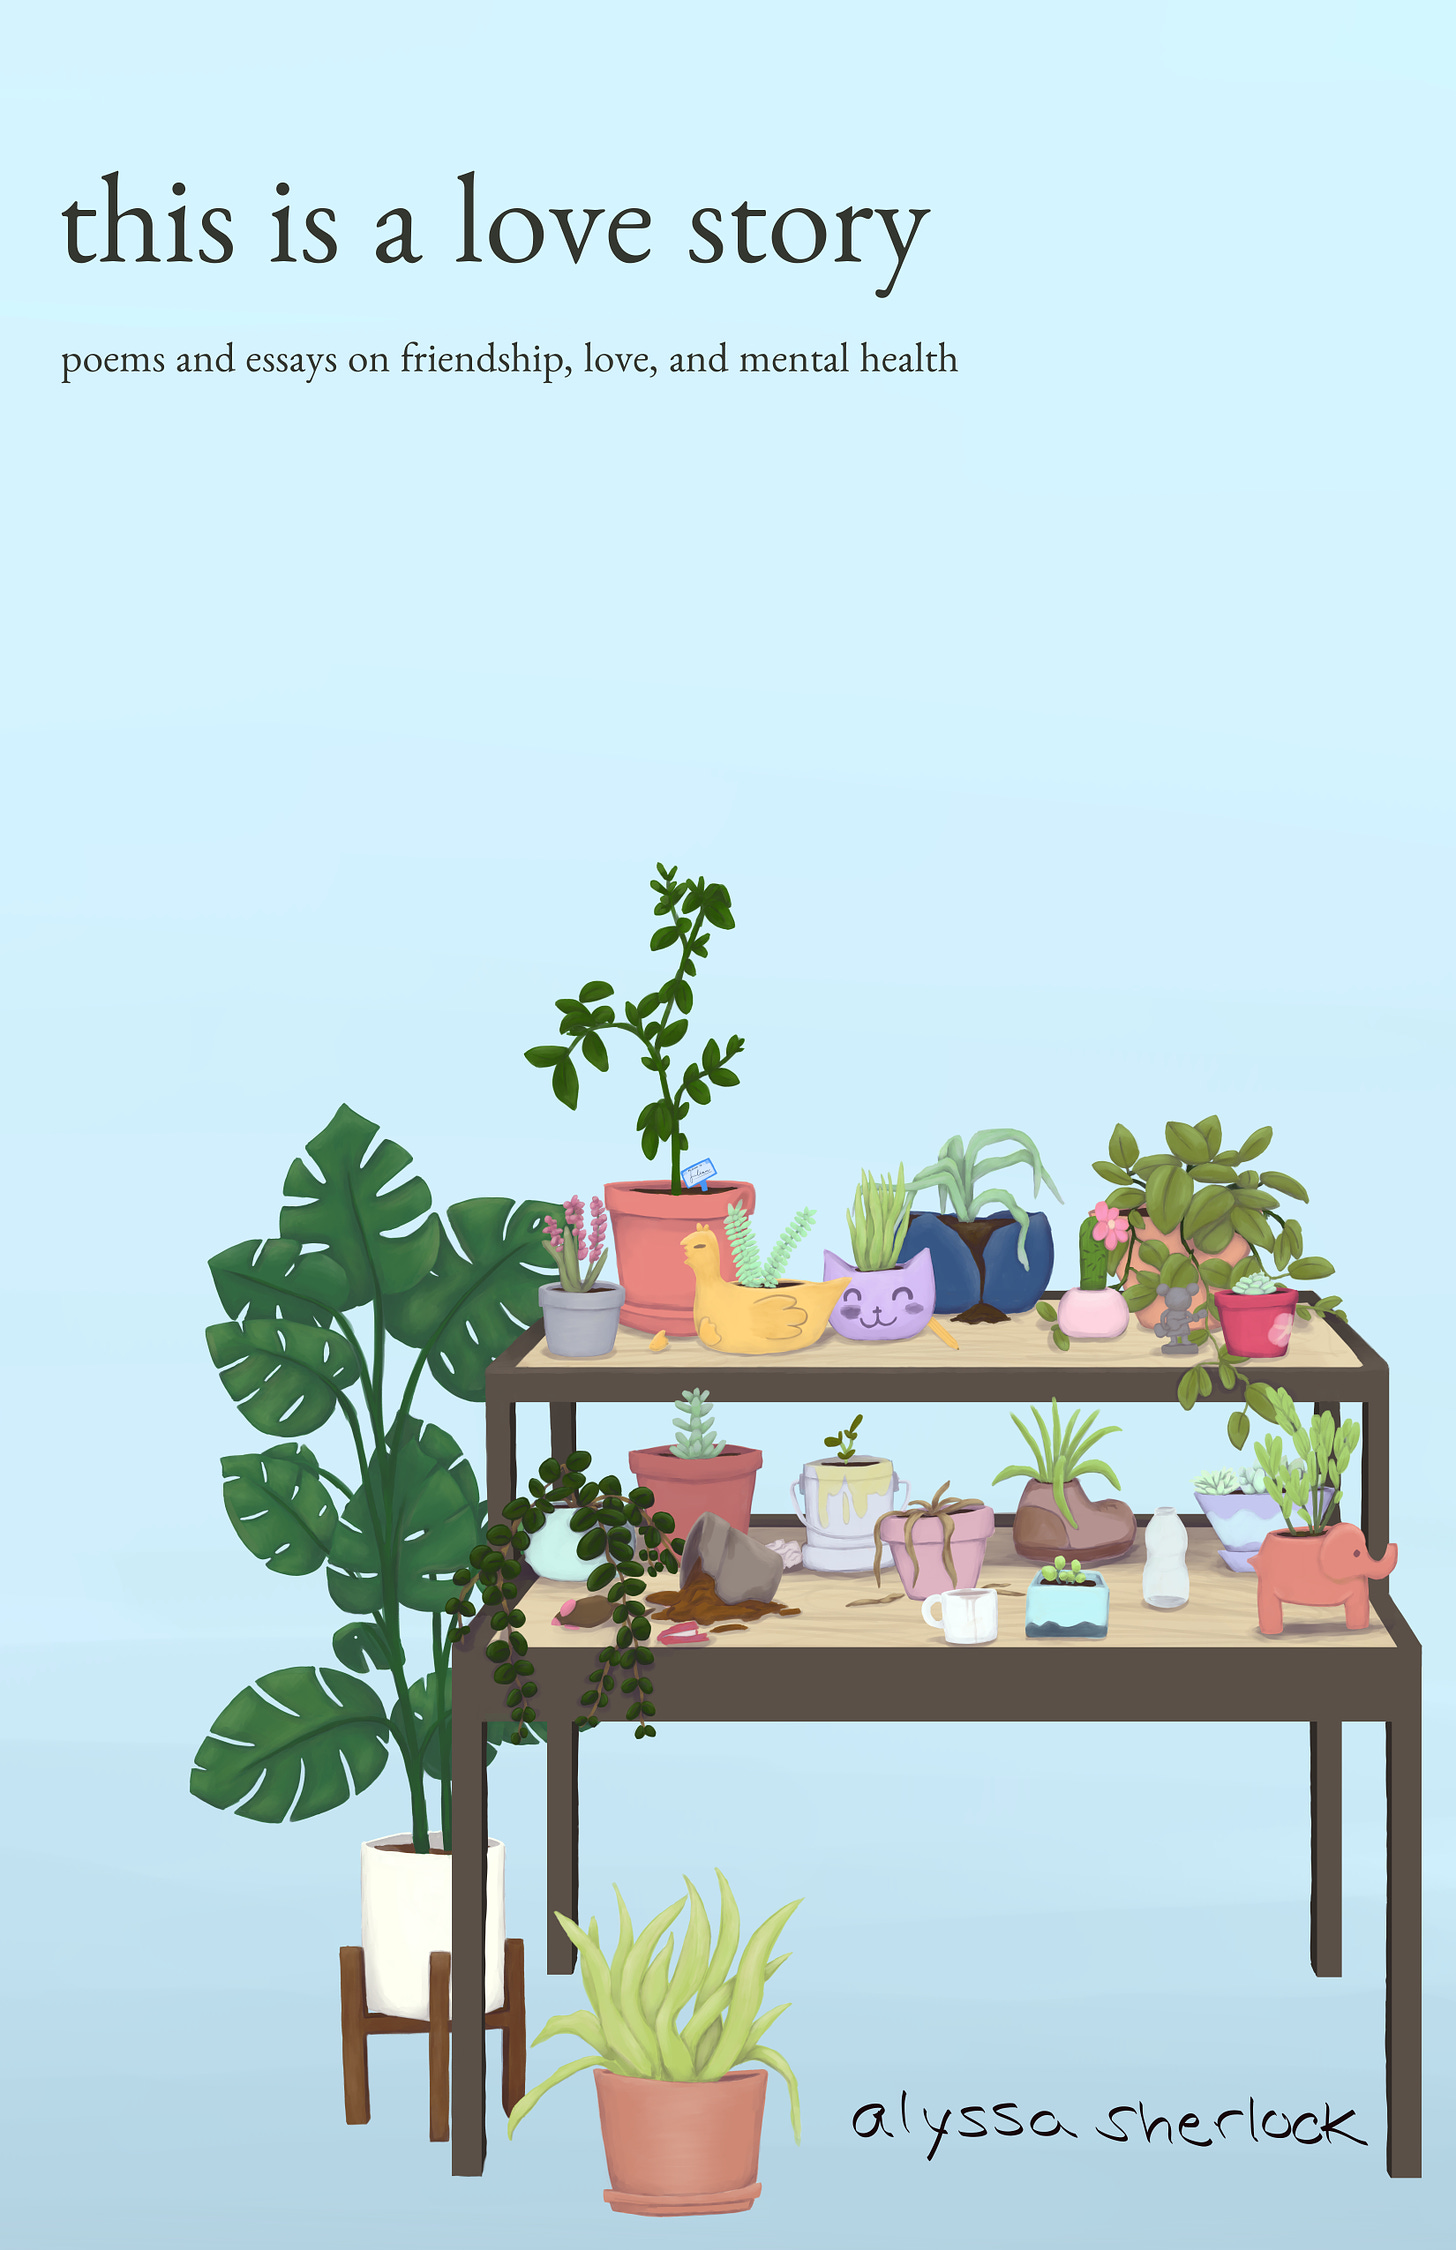 this is a love story poems and essays on friendship, love, and mental health cover, sky blue background with table full of plants in different states on a table, kinda messy just like our lives